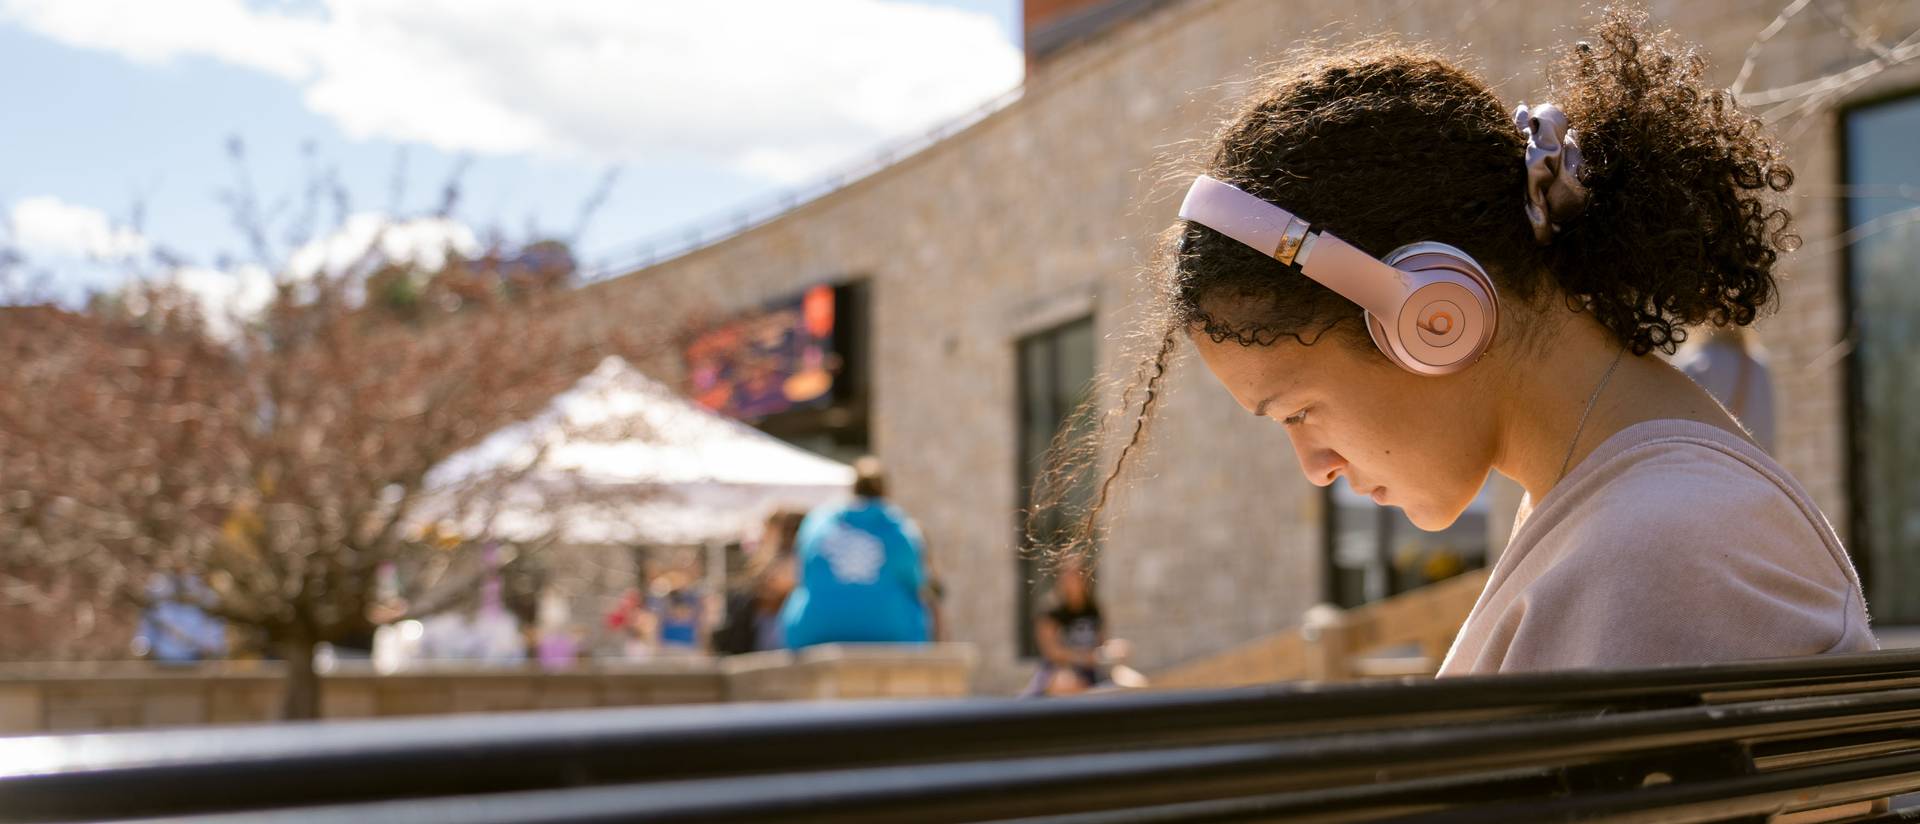 girl on a bench with pink headphones on, curly hair in ponytail